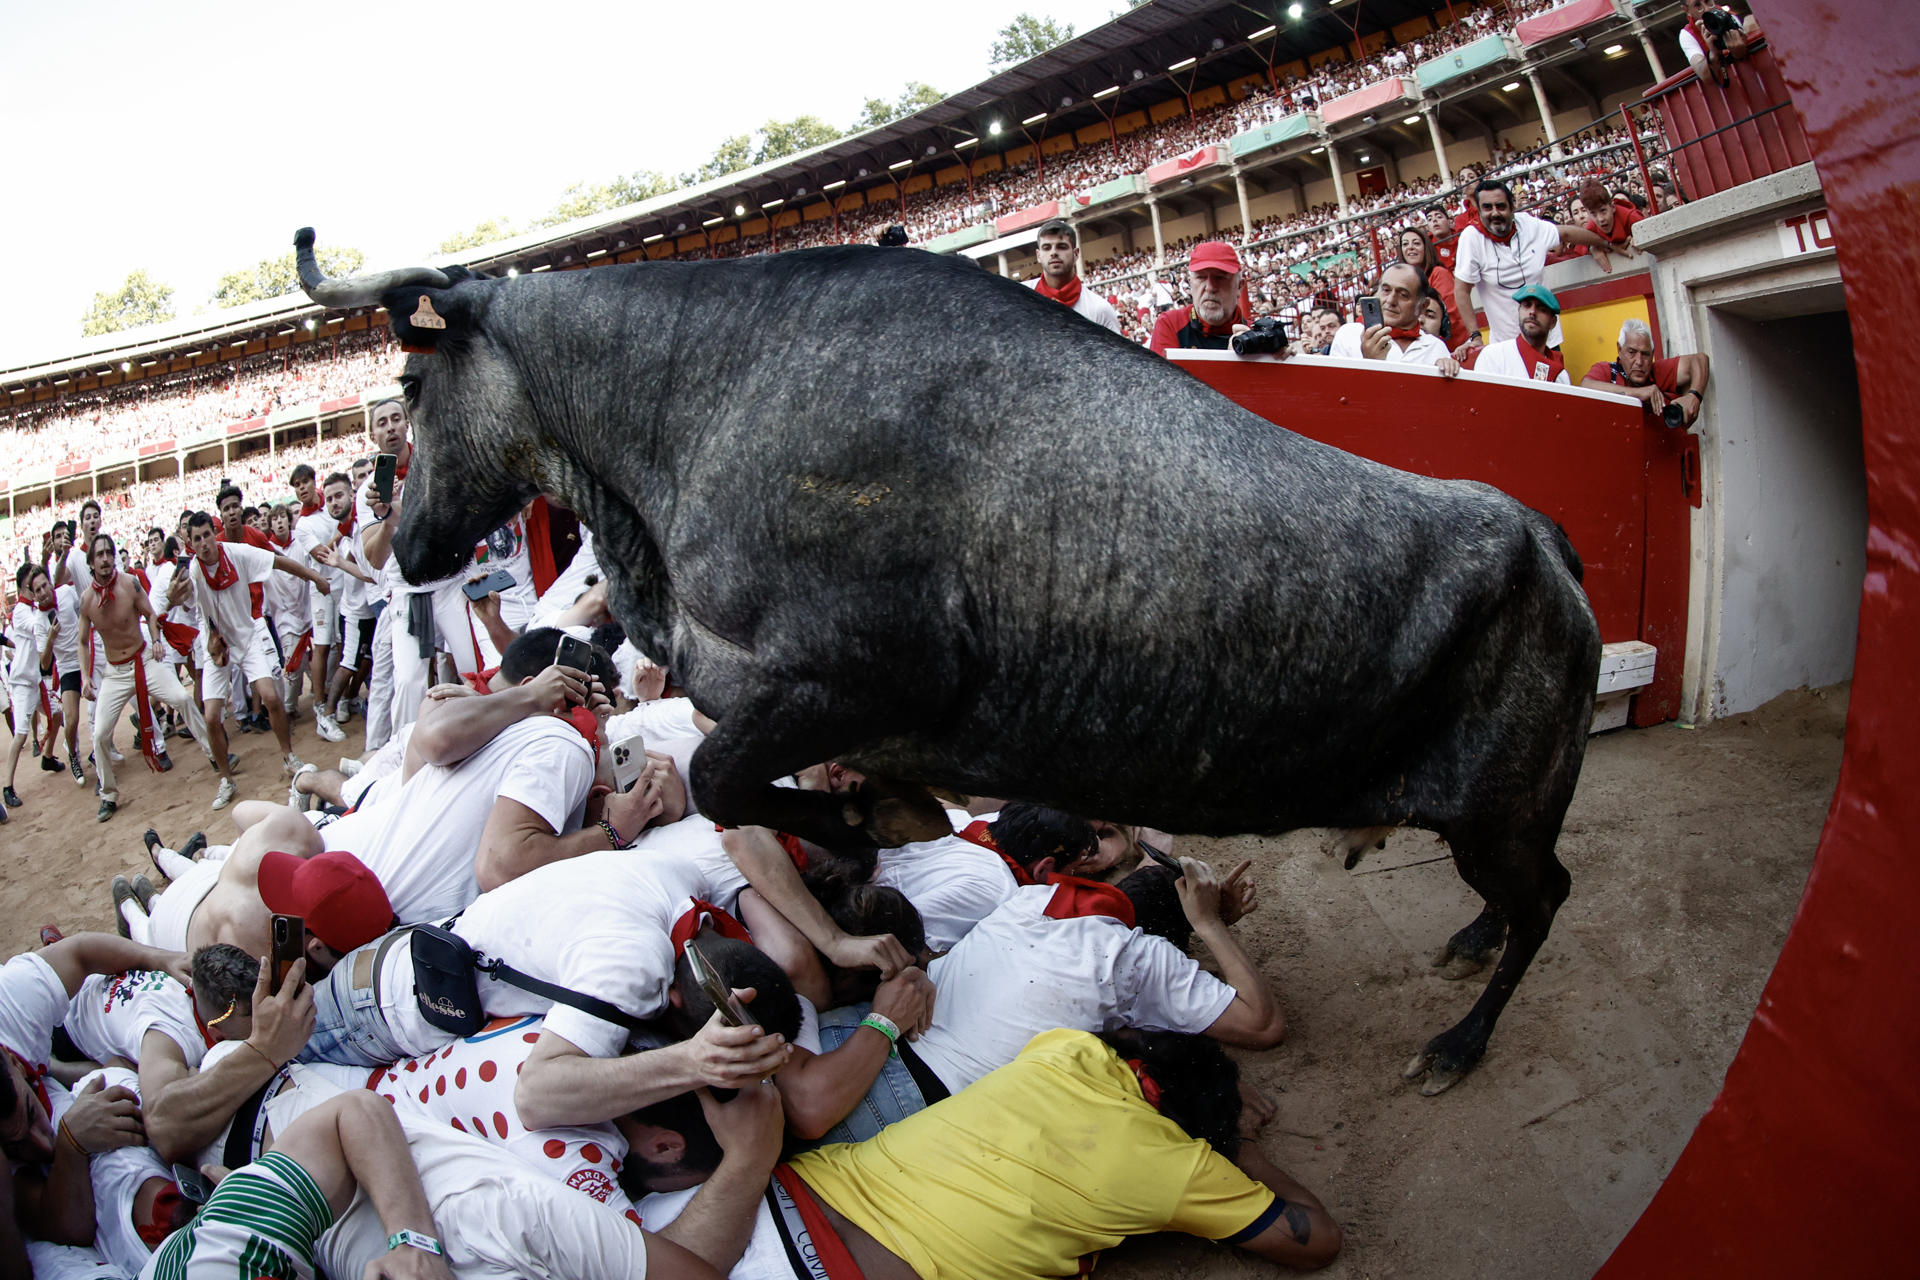 A young calf charges a runner at the bullring after the third bullrun of Sanfermines, with bulls of Cebada Gago ranch, in Pamplona, northern Spain, 09 July 2023. EFE/Jesus Diges